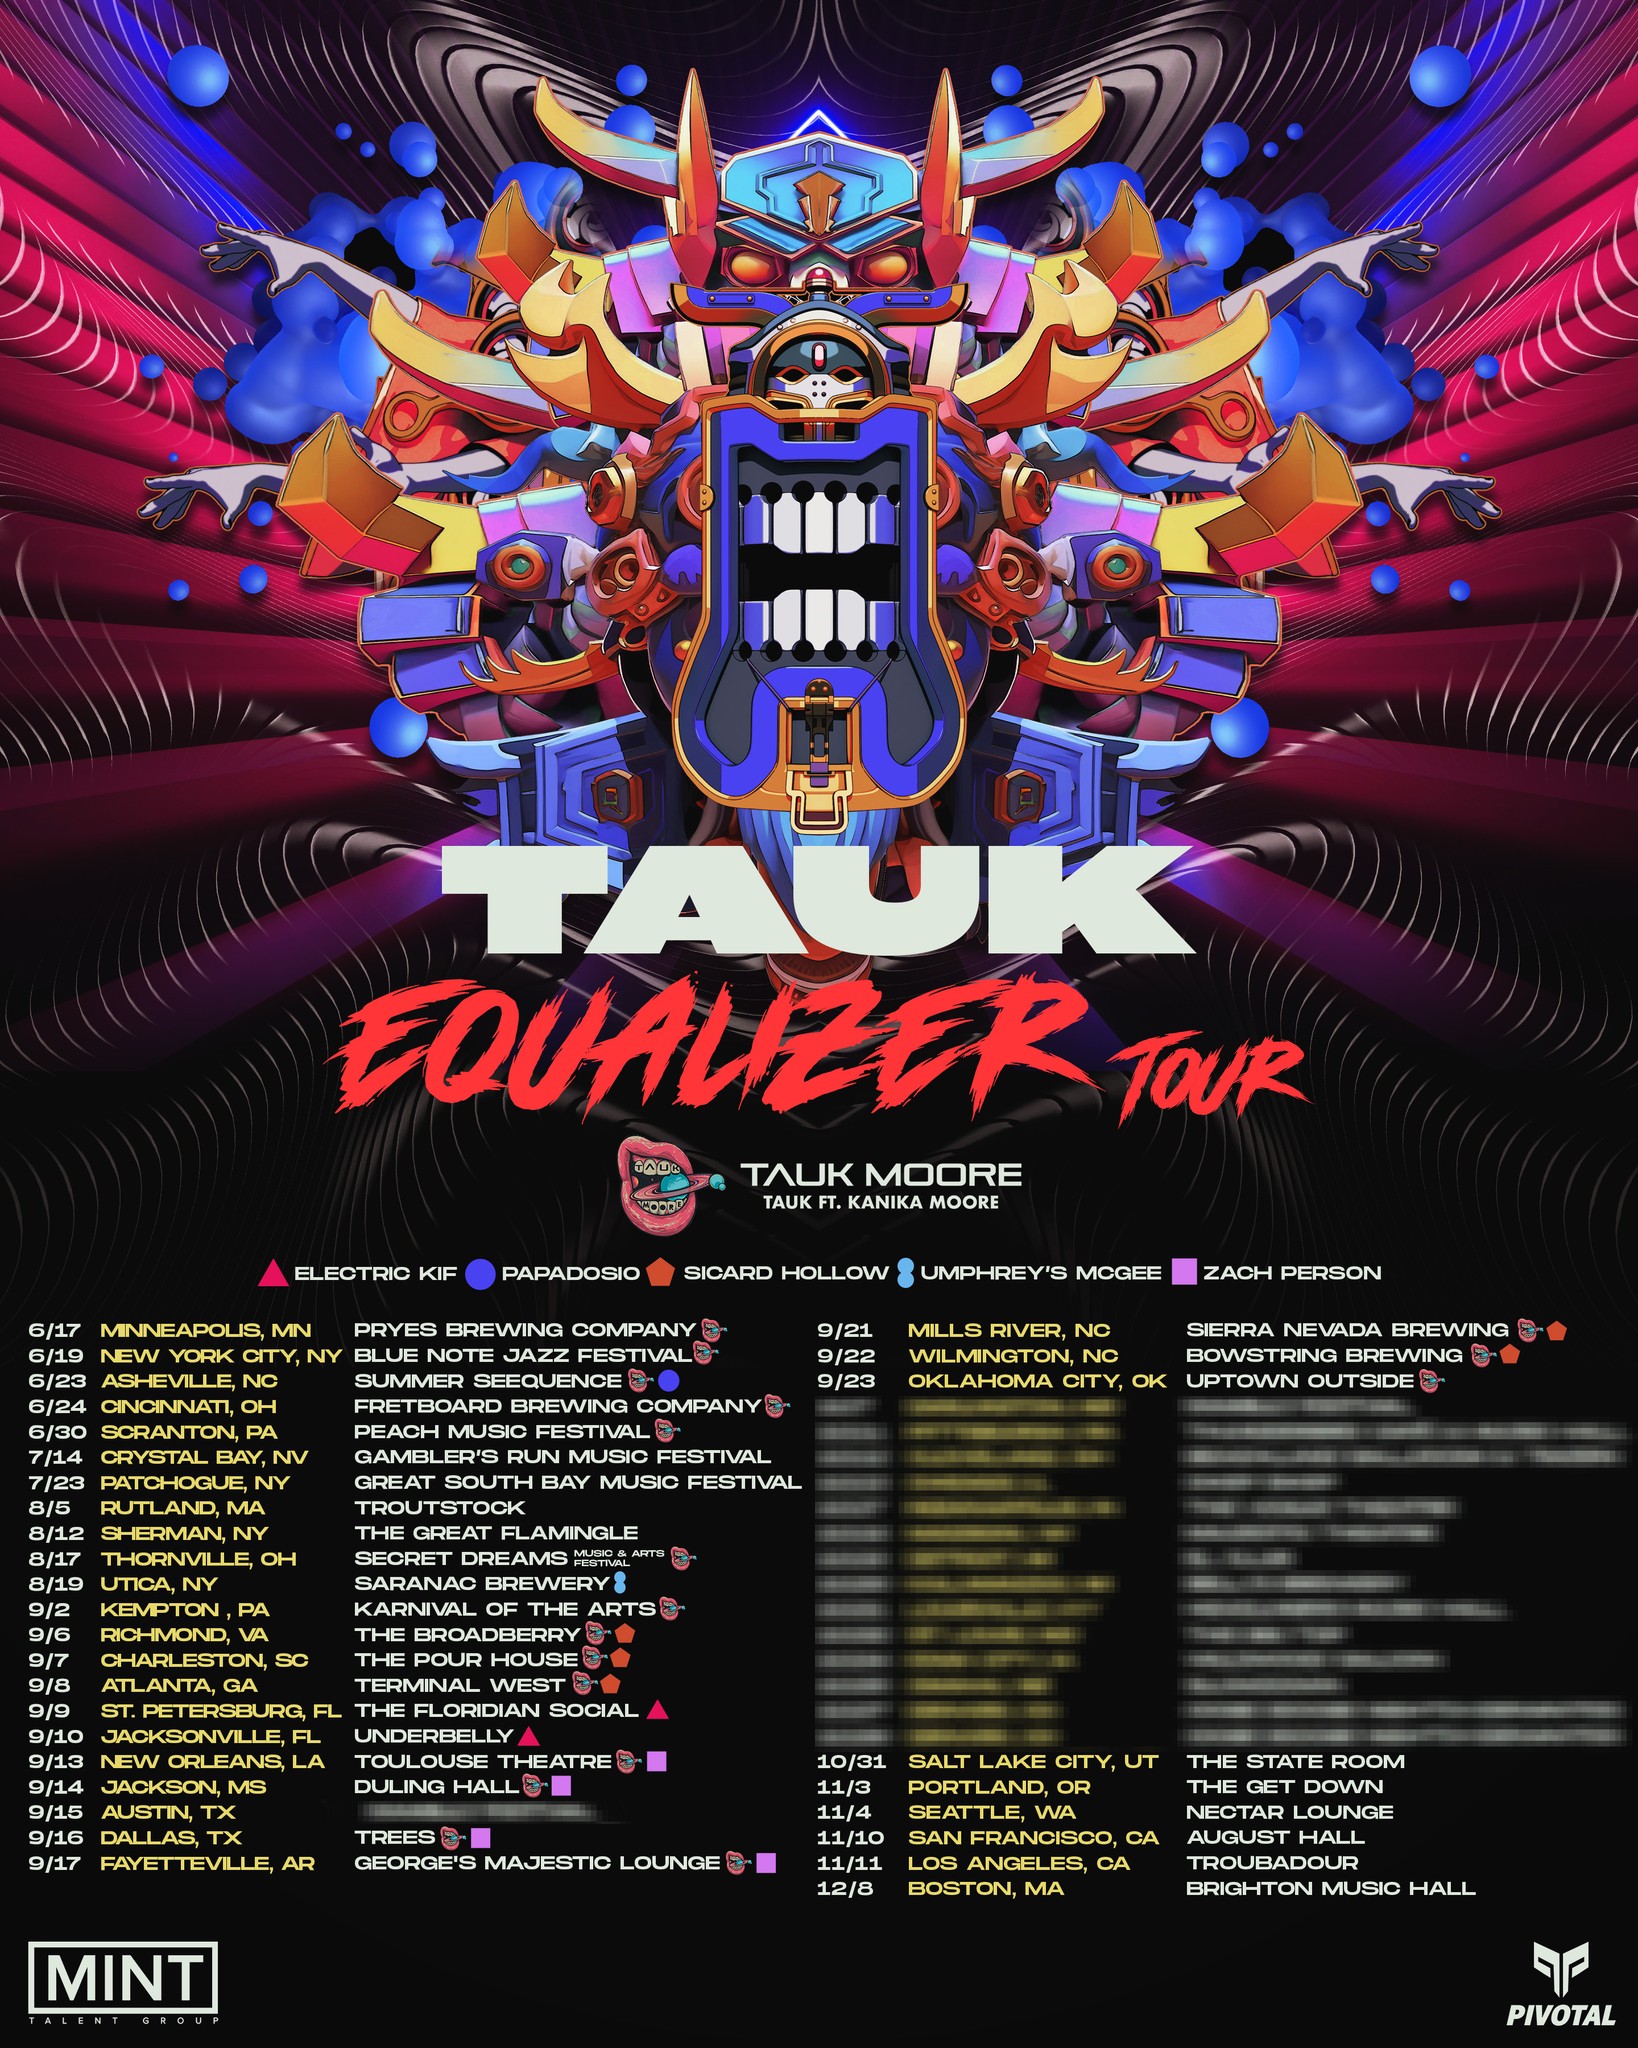 TAUK PRESENTS: THE EQUALIZER TOUR